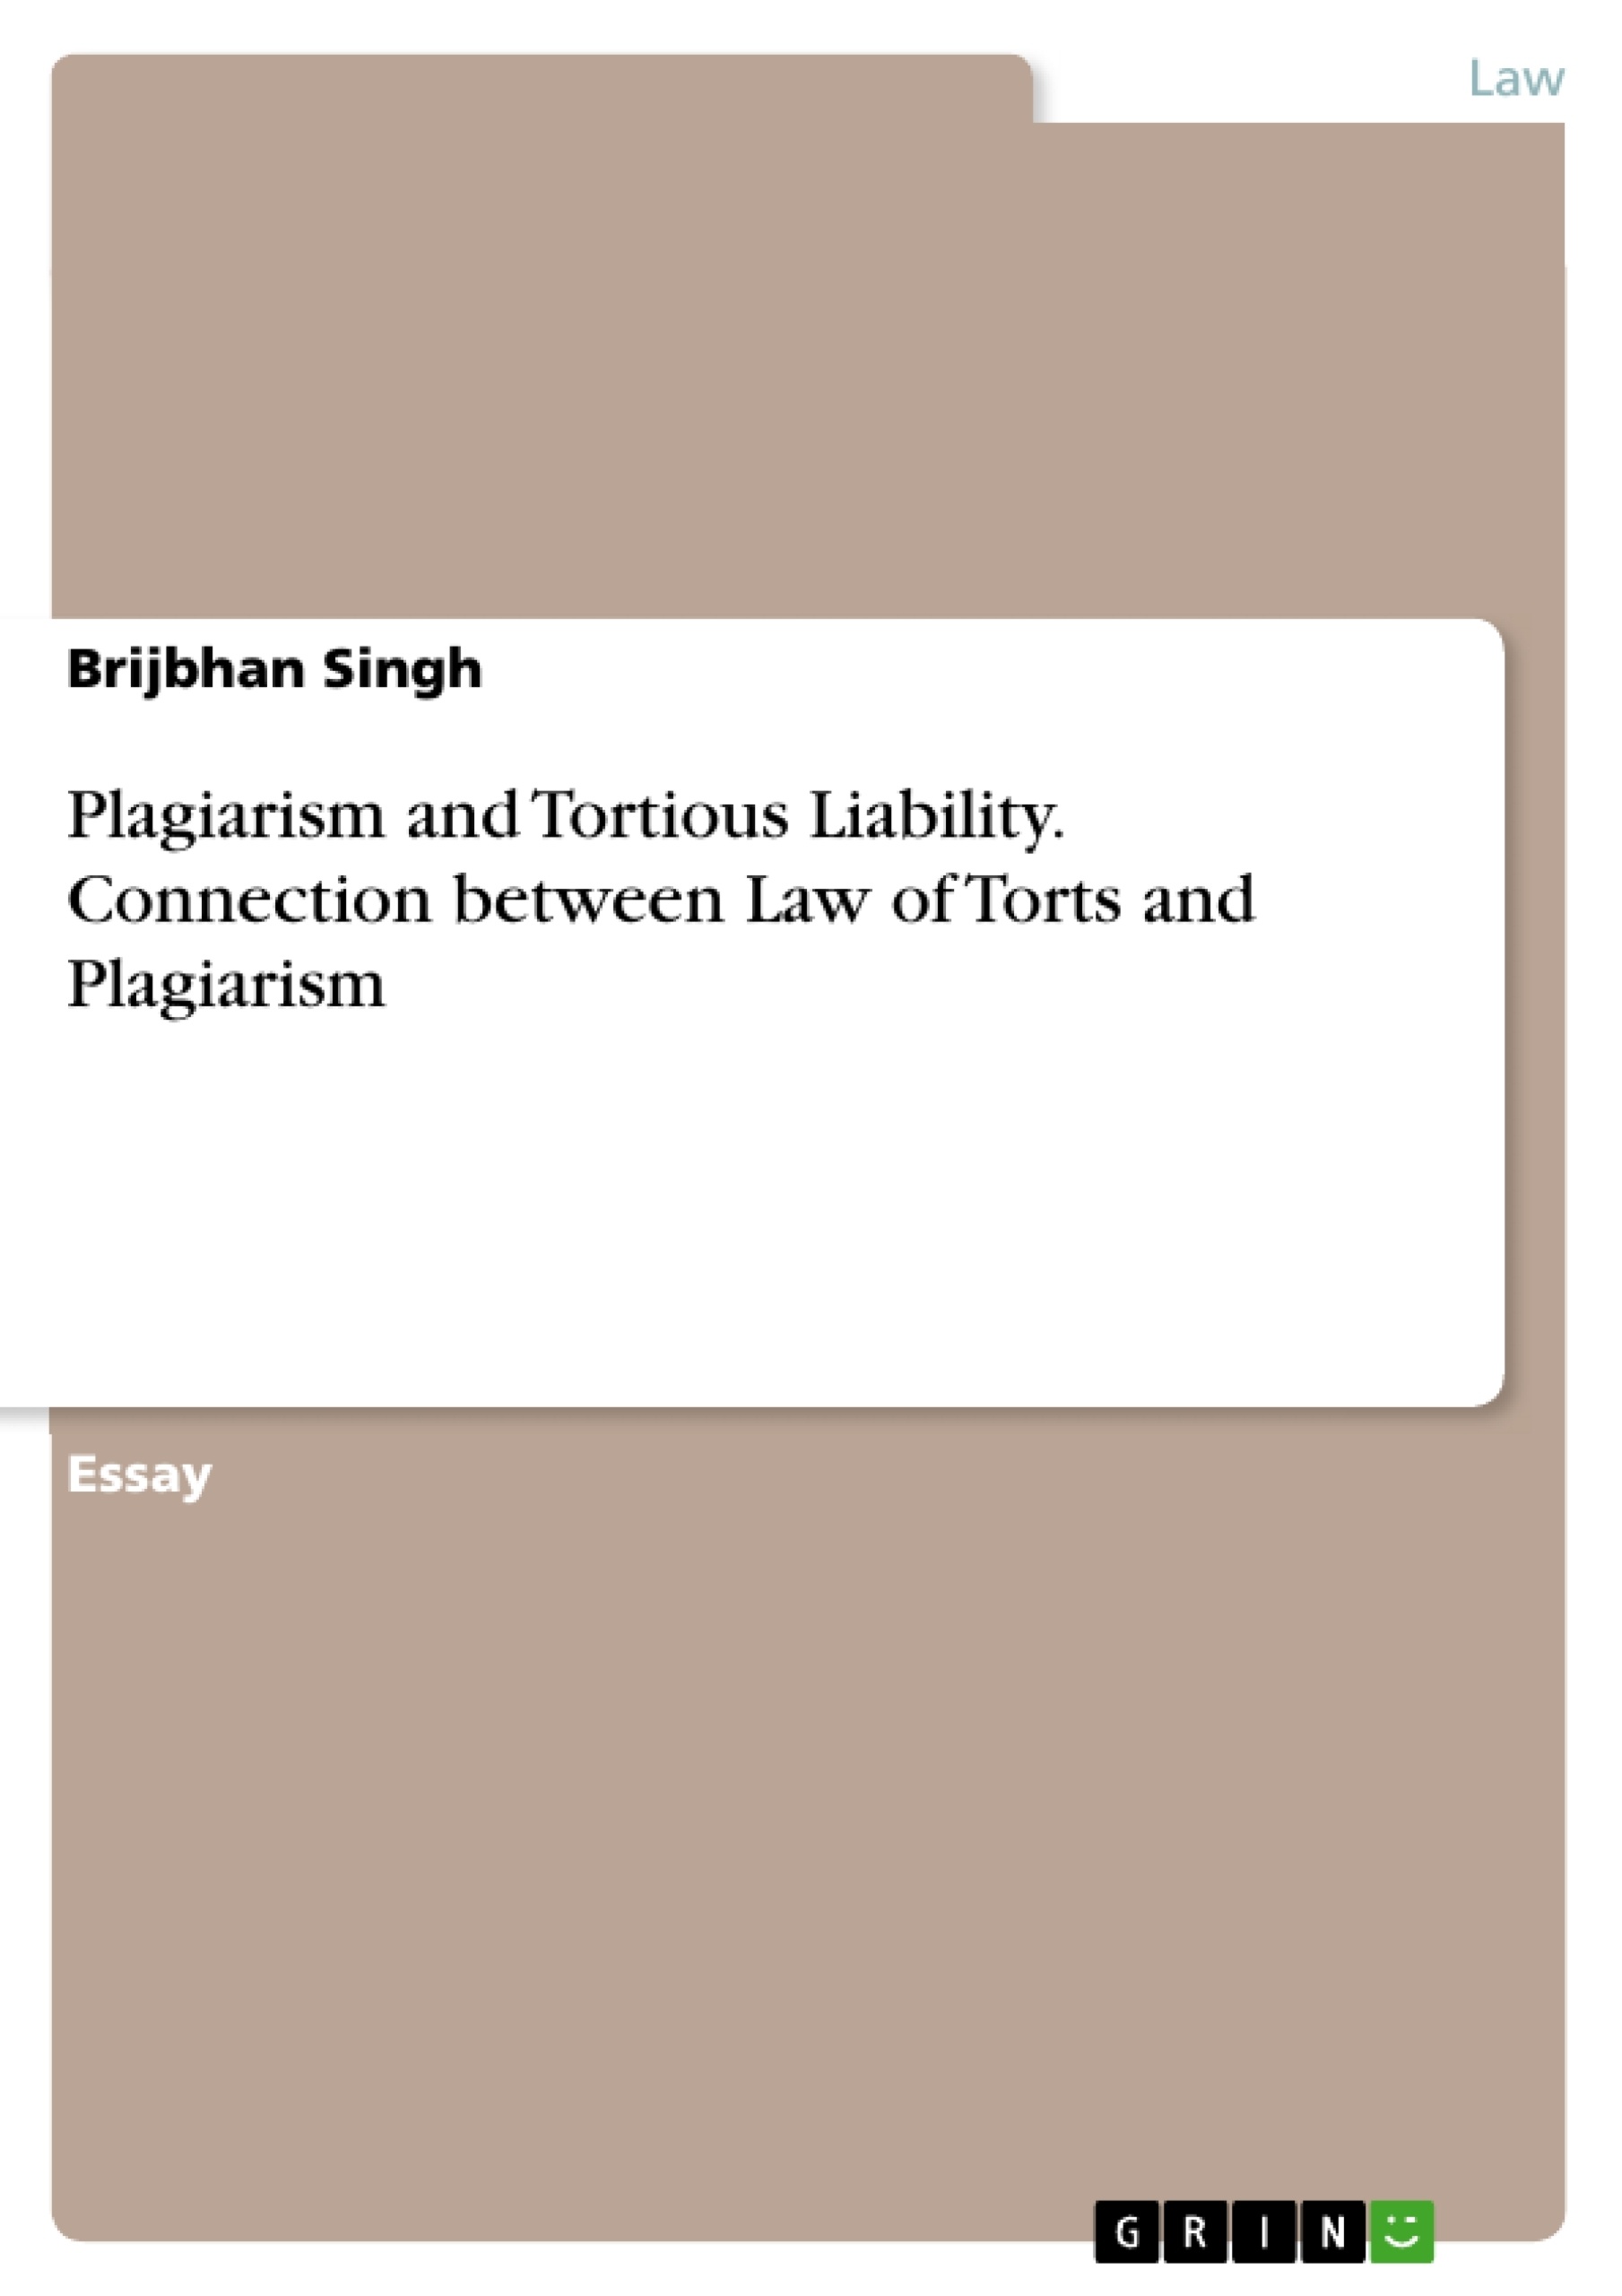 Title: Plagiarism and Tortious Liability. Connection between Law of Torts and Plagiarism